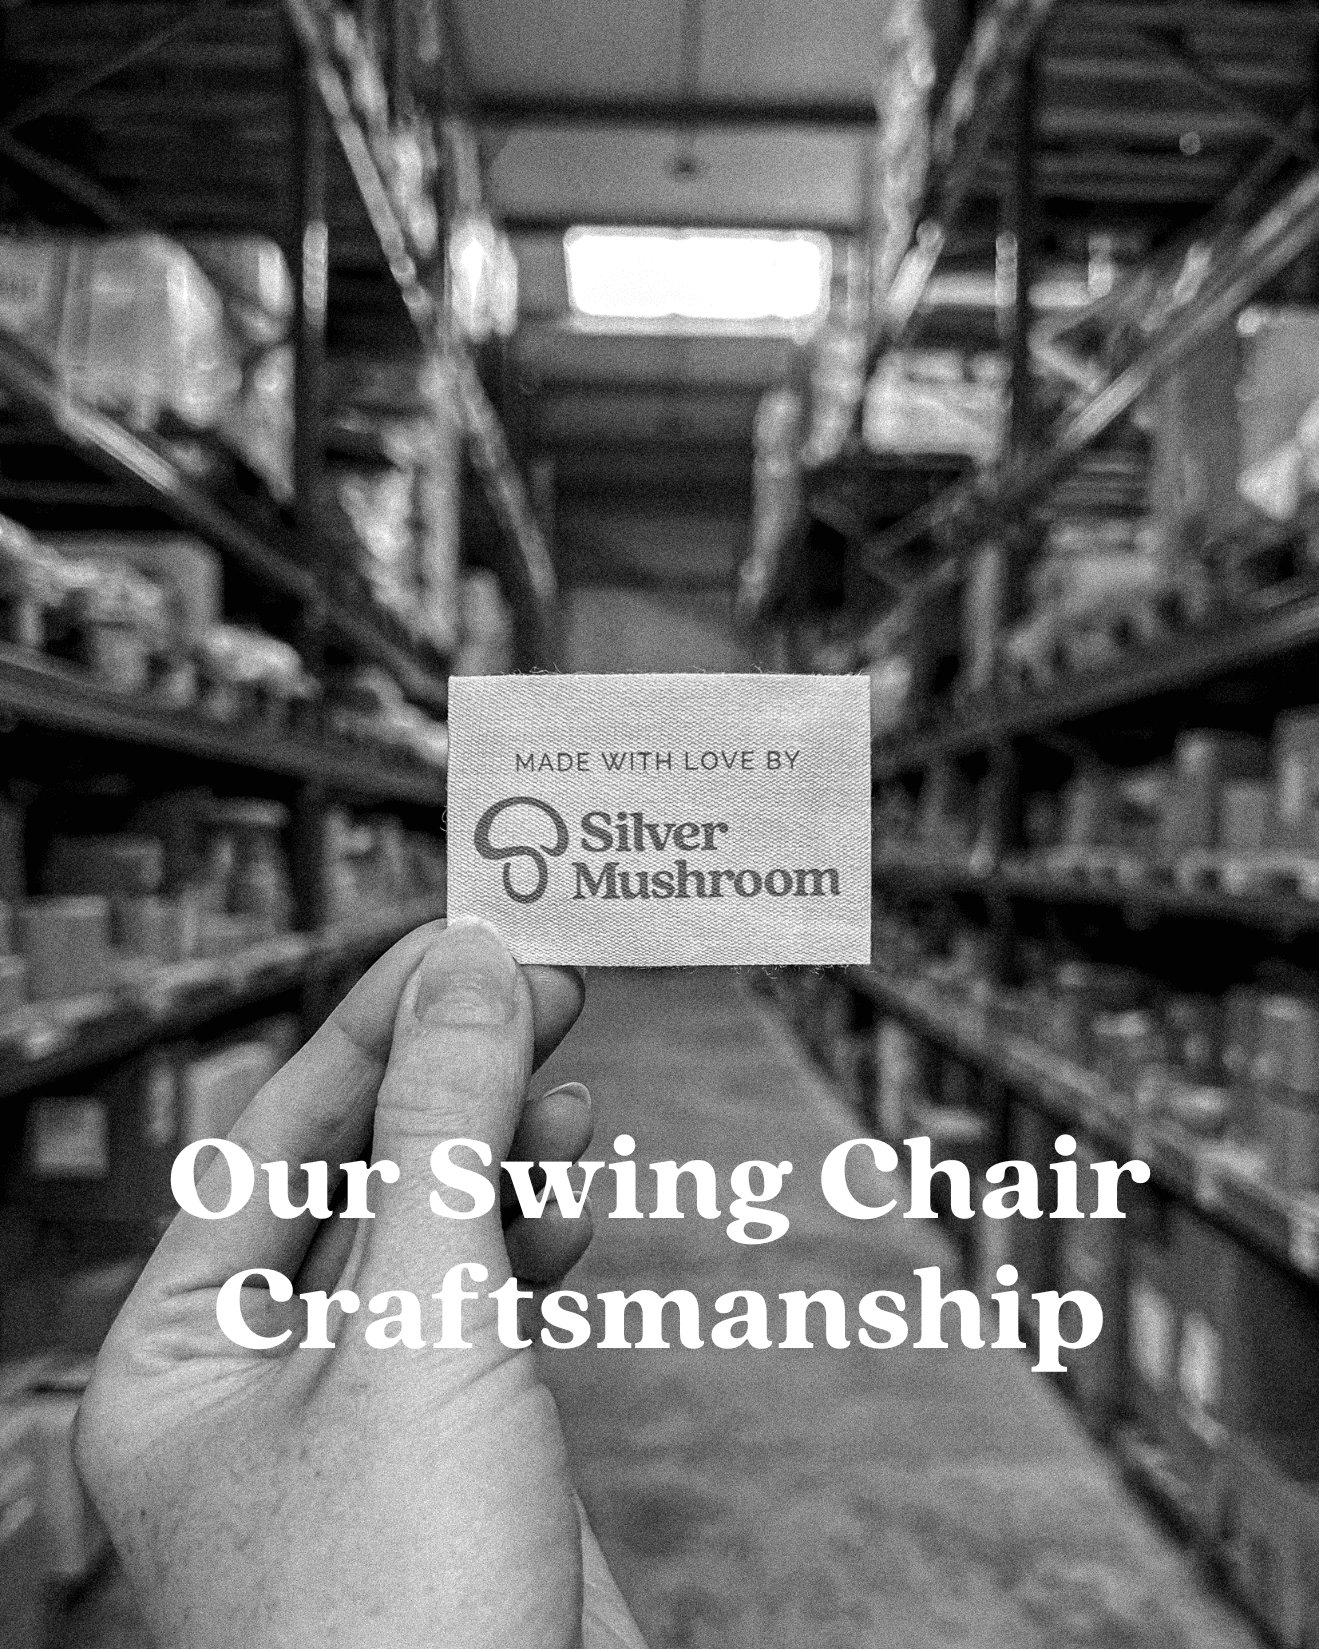 Our swing chair craftsmanship